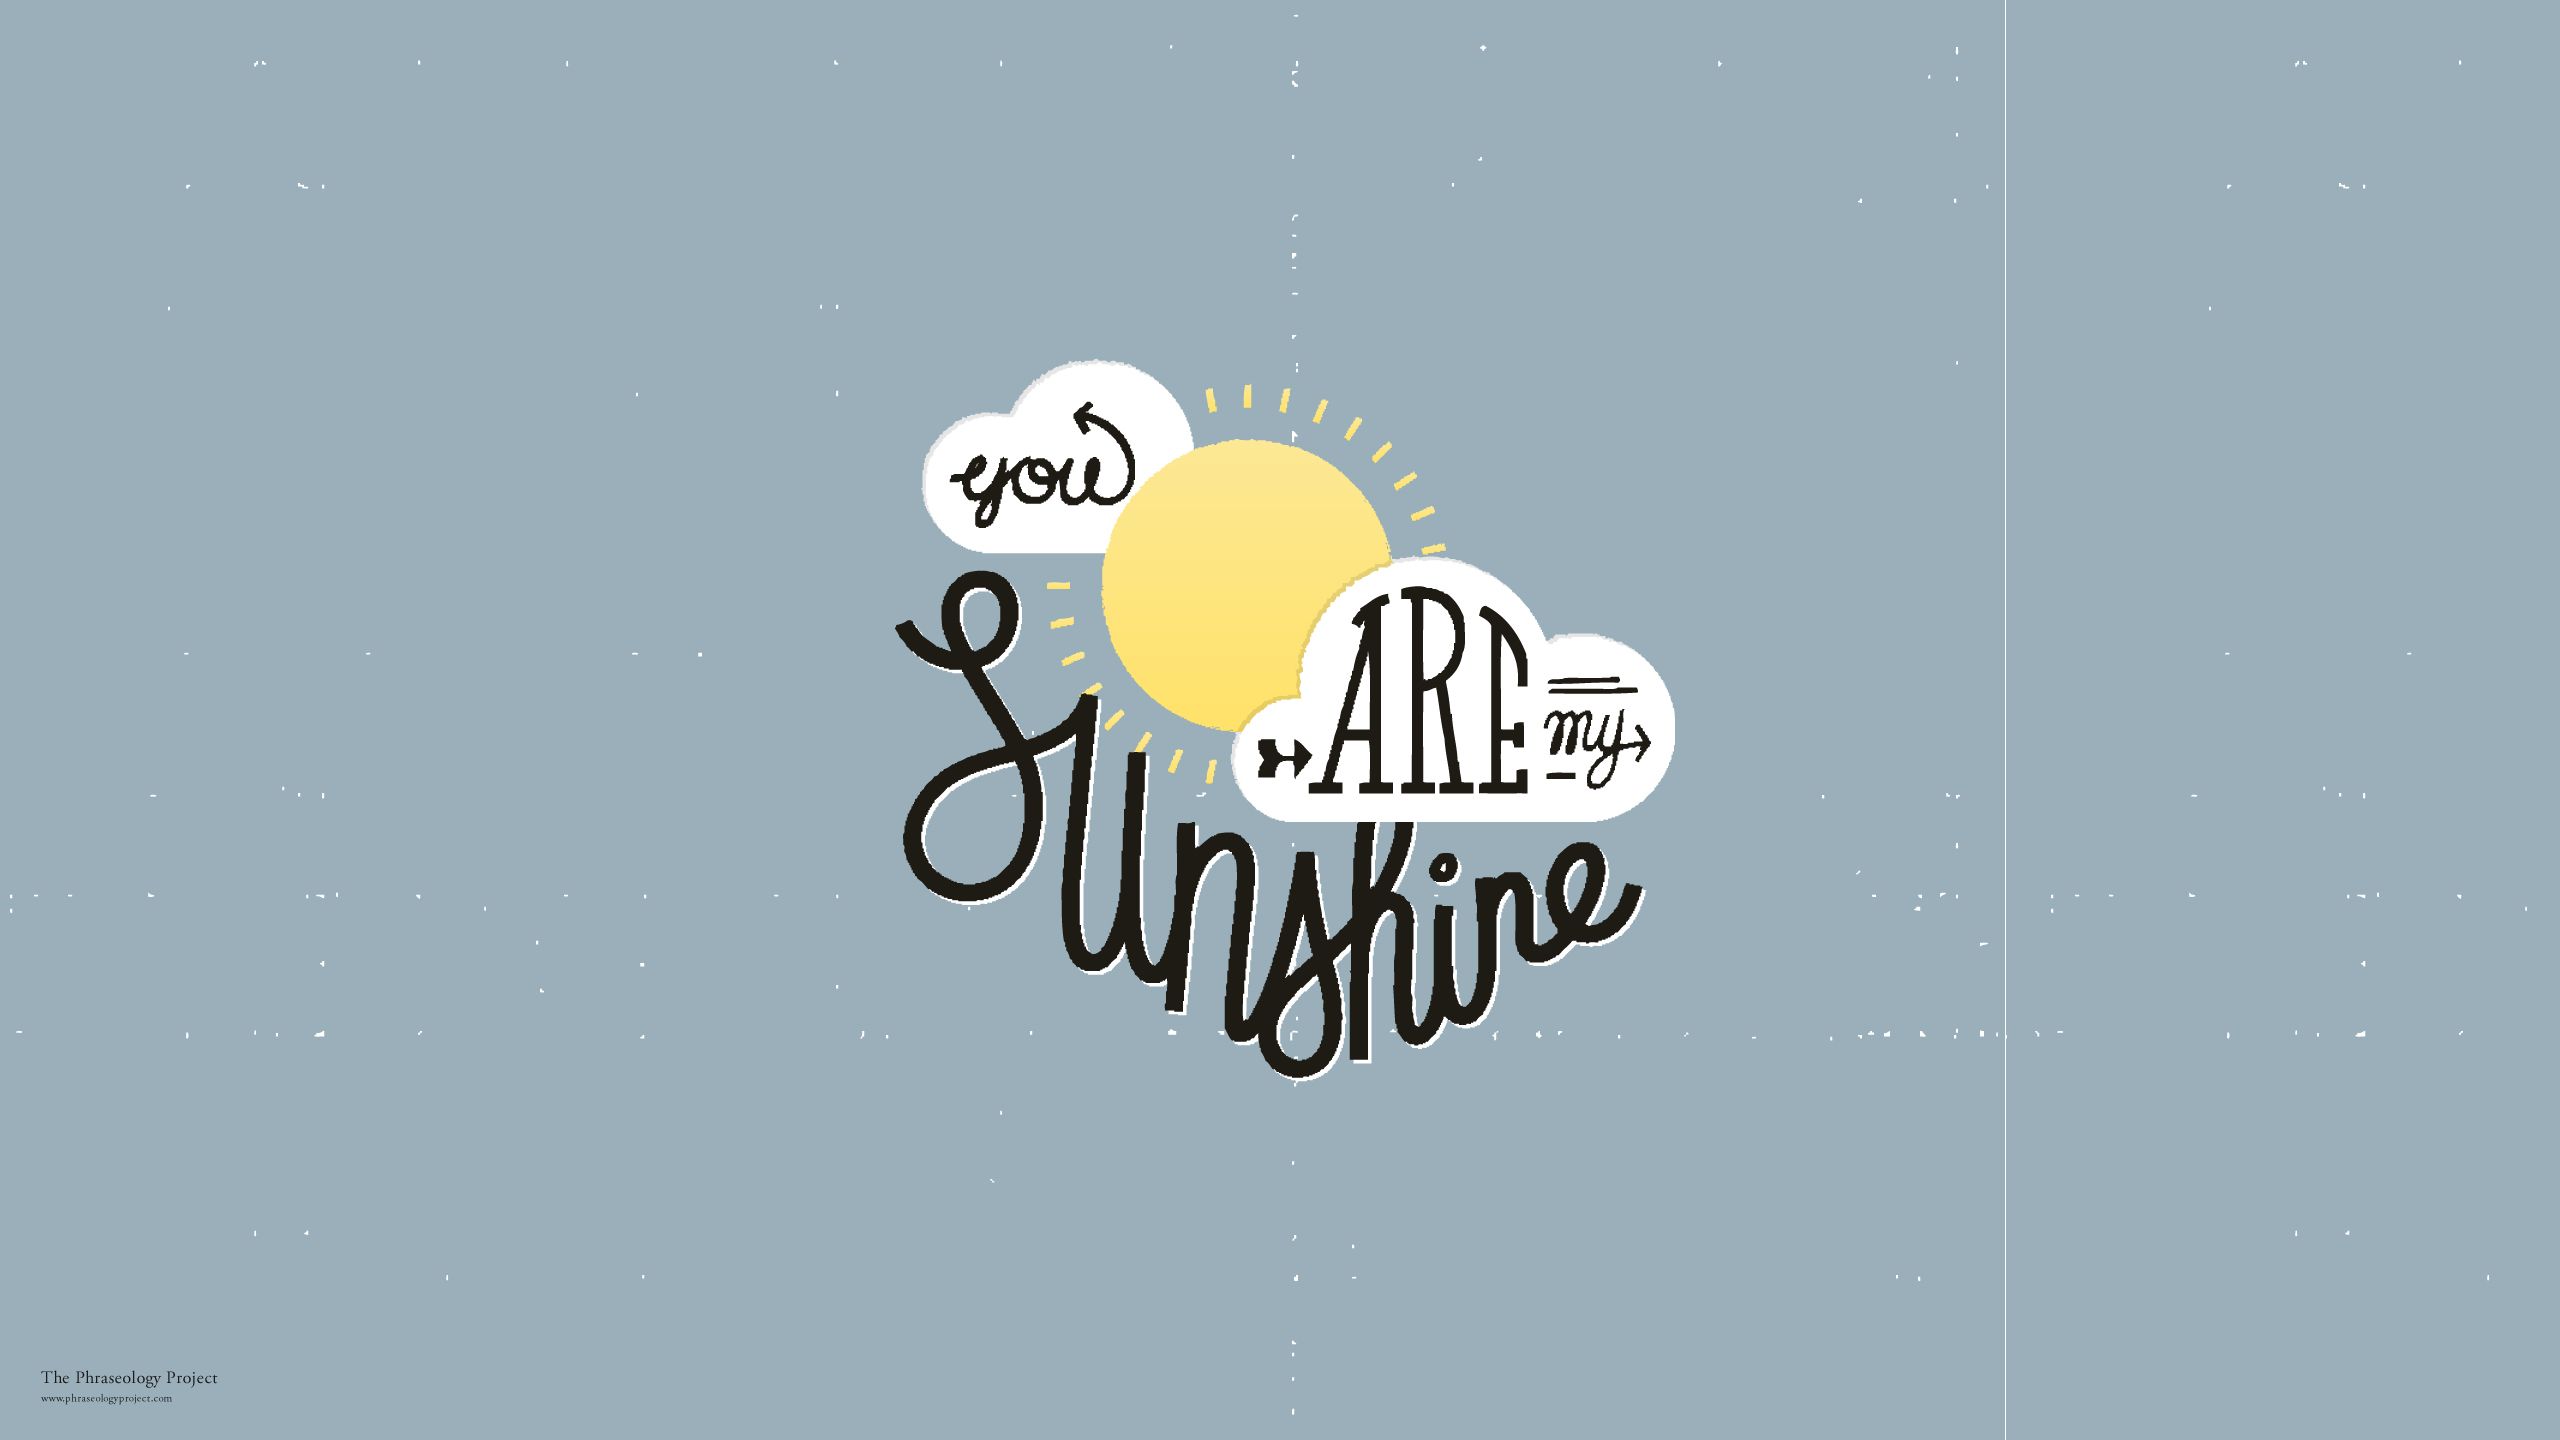 You are my sunshine wallpaper by The Thinking Project - Sunshine